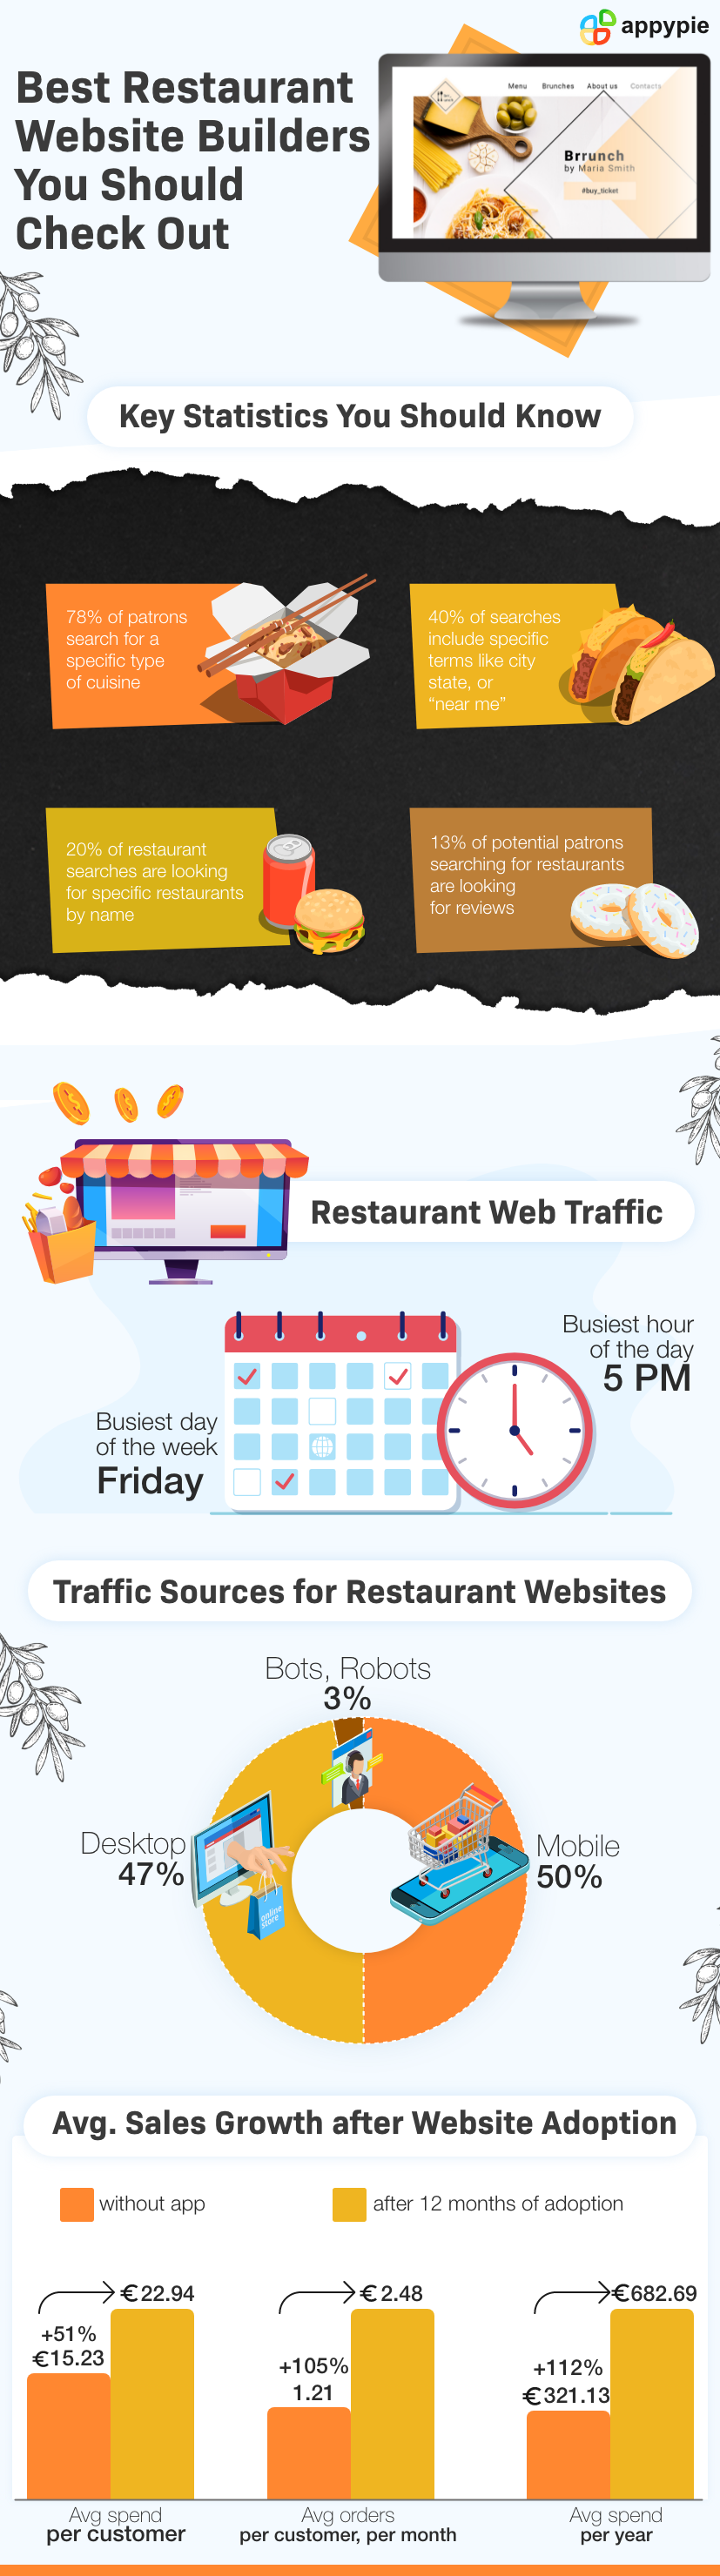 Best Restaurant Website BuildersYou Should Check Out - Appy Pie